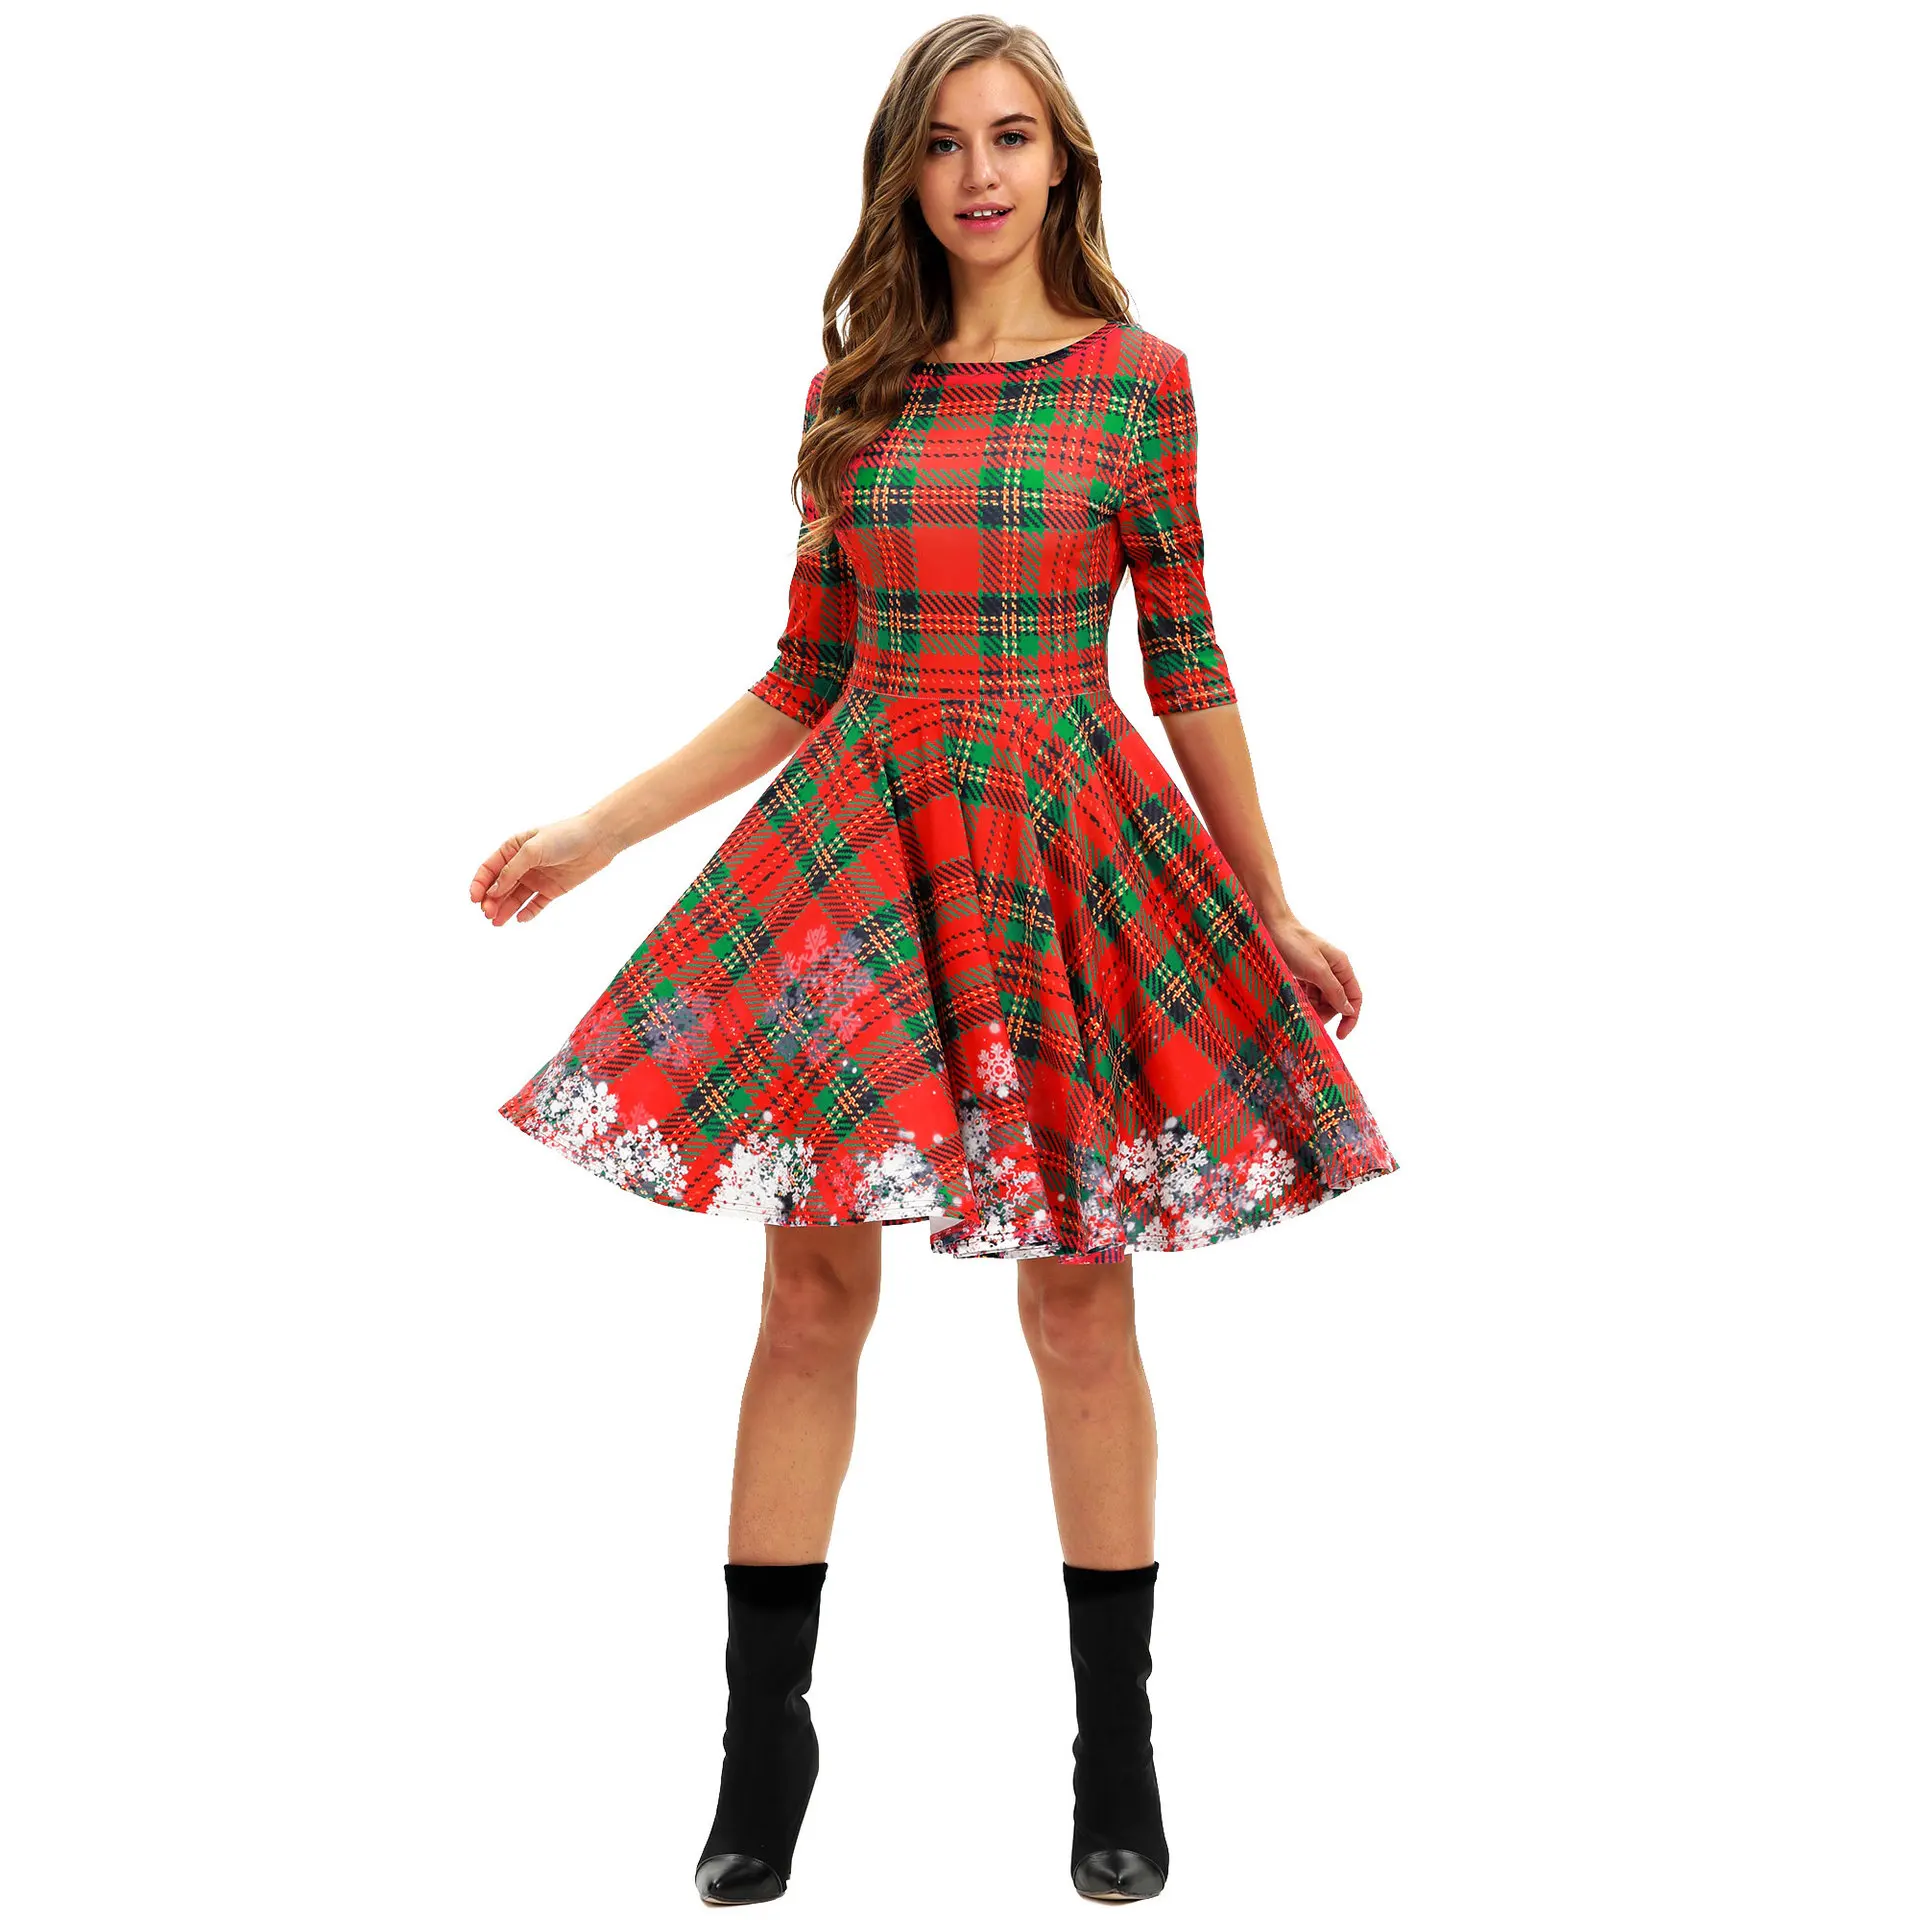 New Listing Made In China Ready Stock Casual O-neck Christmas Dress Women -  Buy Christmas Dress Women,Christmas Dress Casual,Christmas Woman Print  Bodycon Dress Product on Alibaba.com